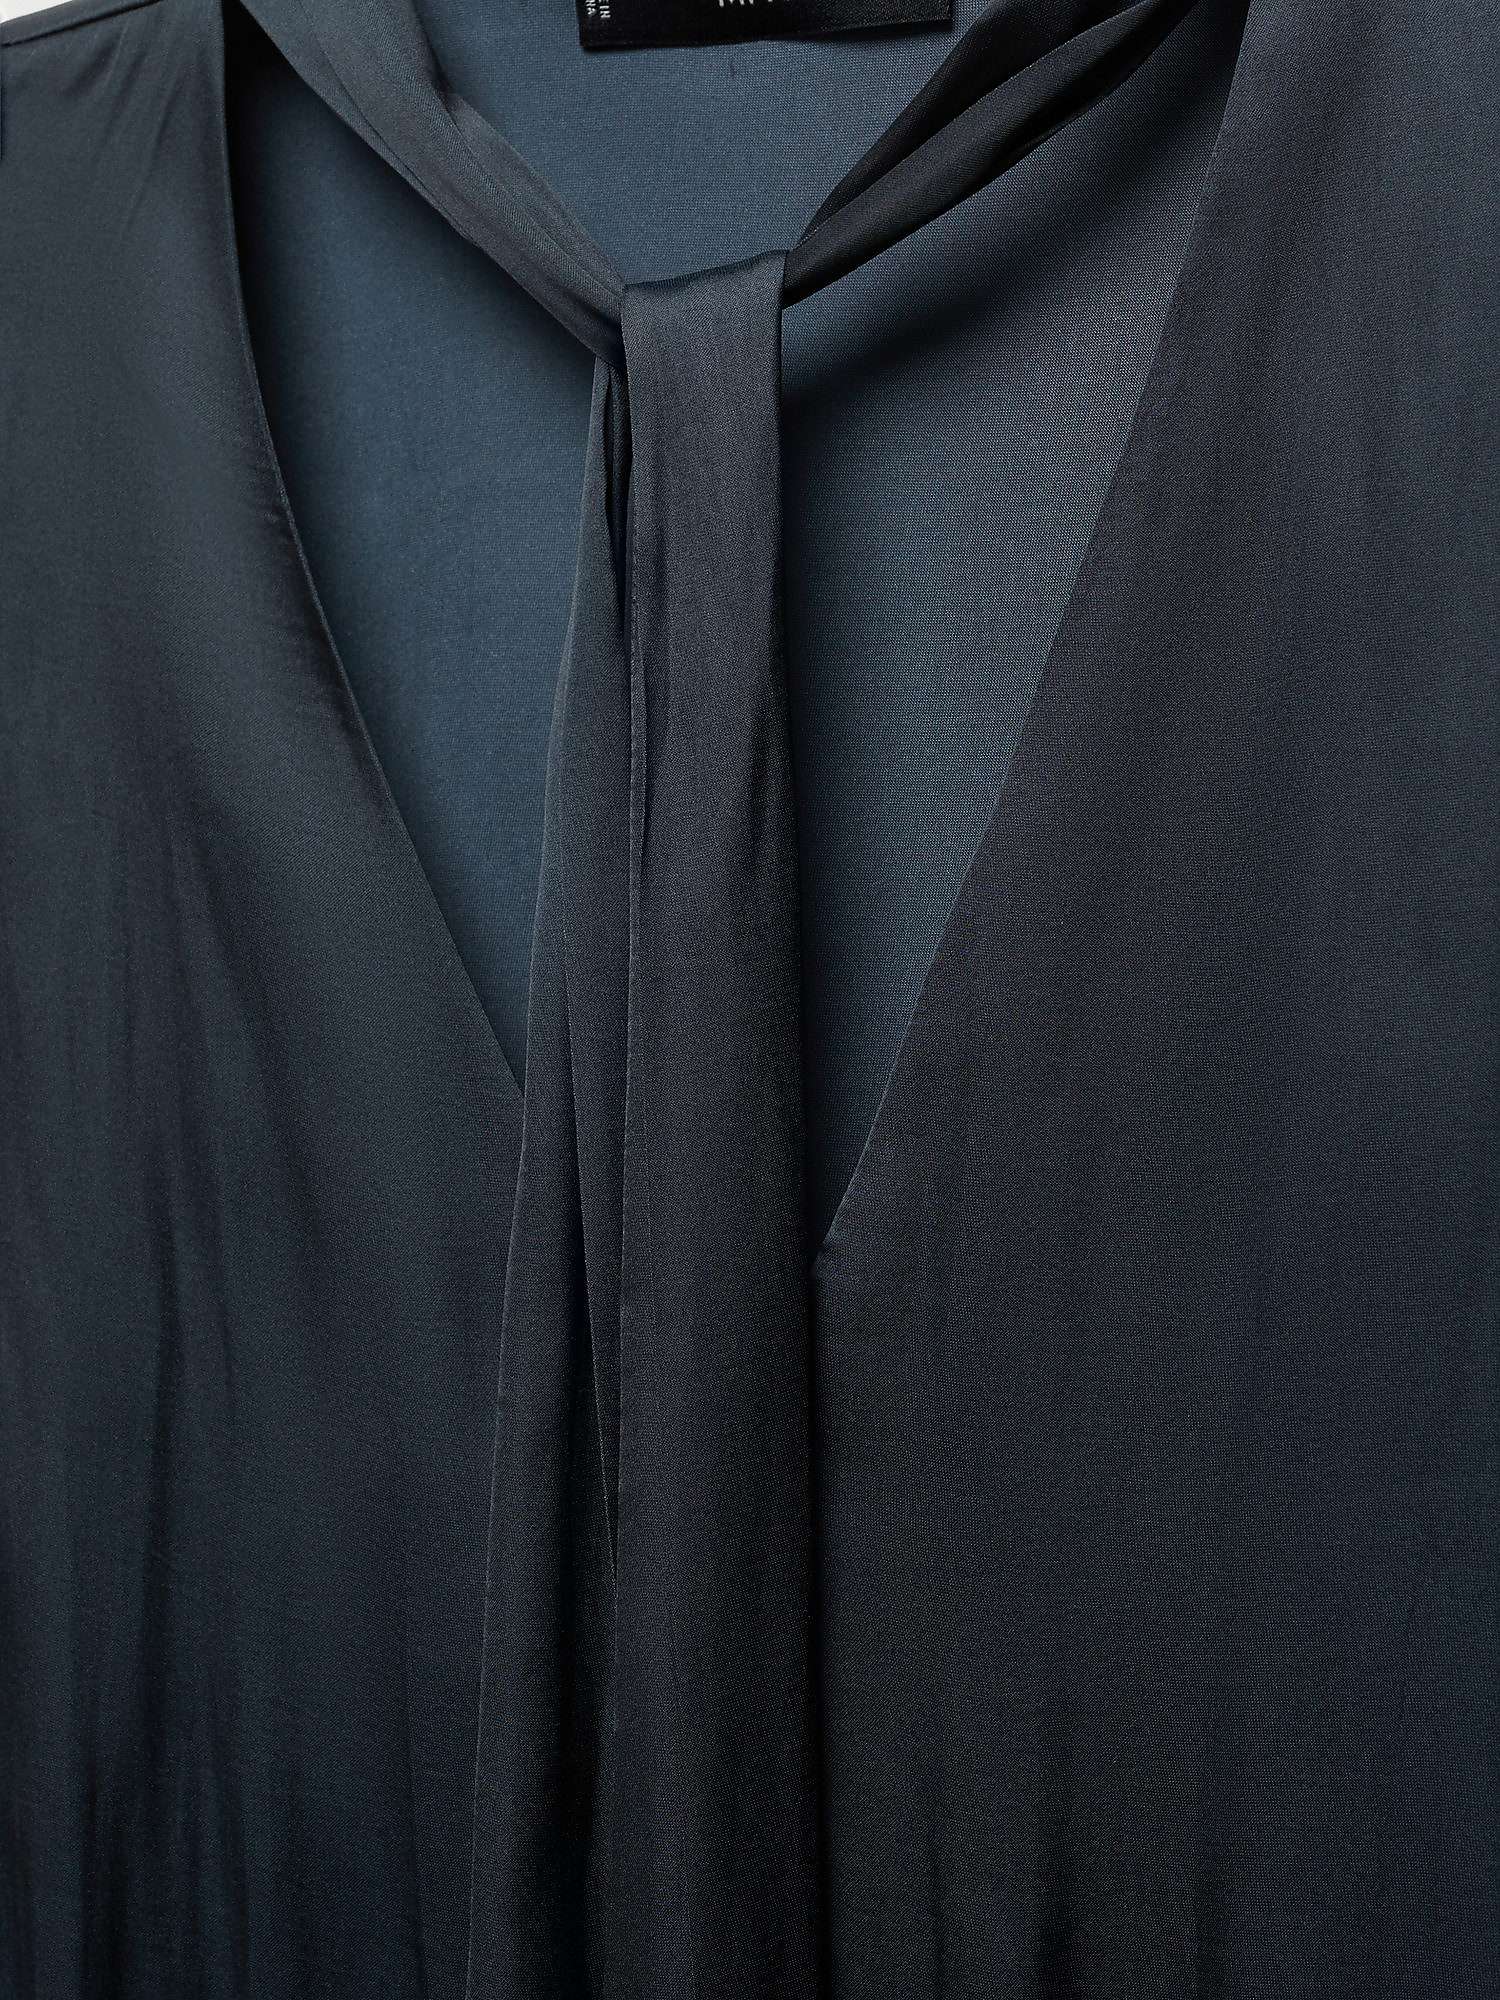 Buy Mango Aire Bow Satin Blouse, Charcoal Online at johnlewis.com